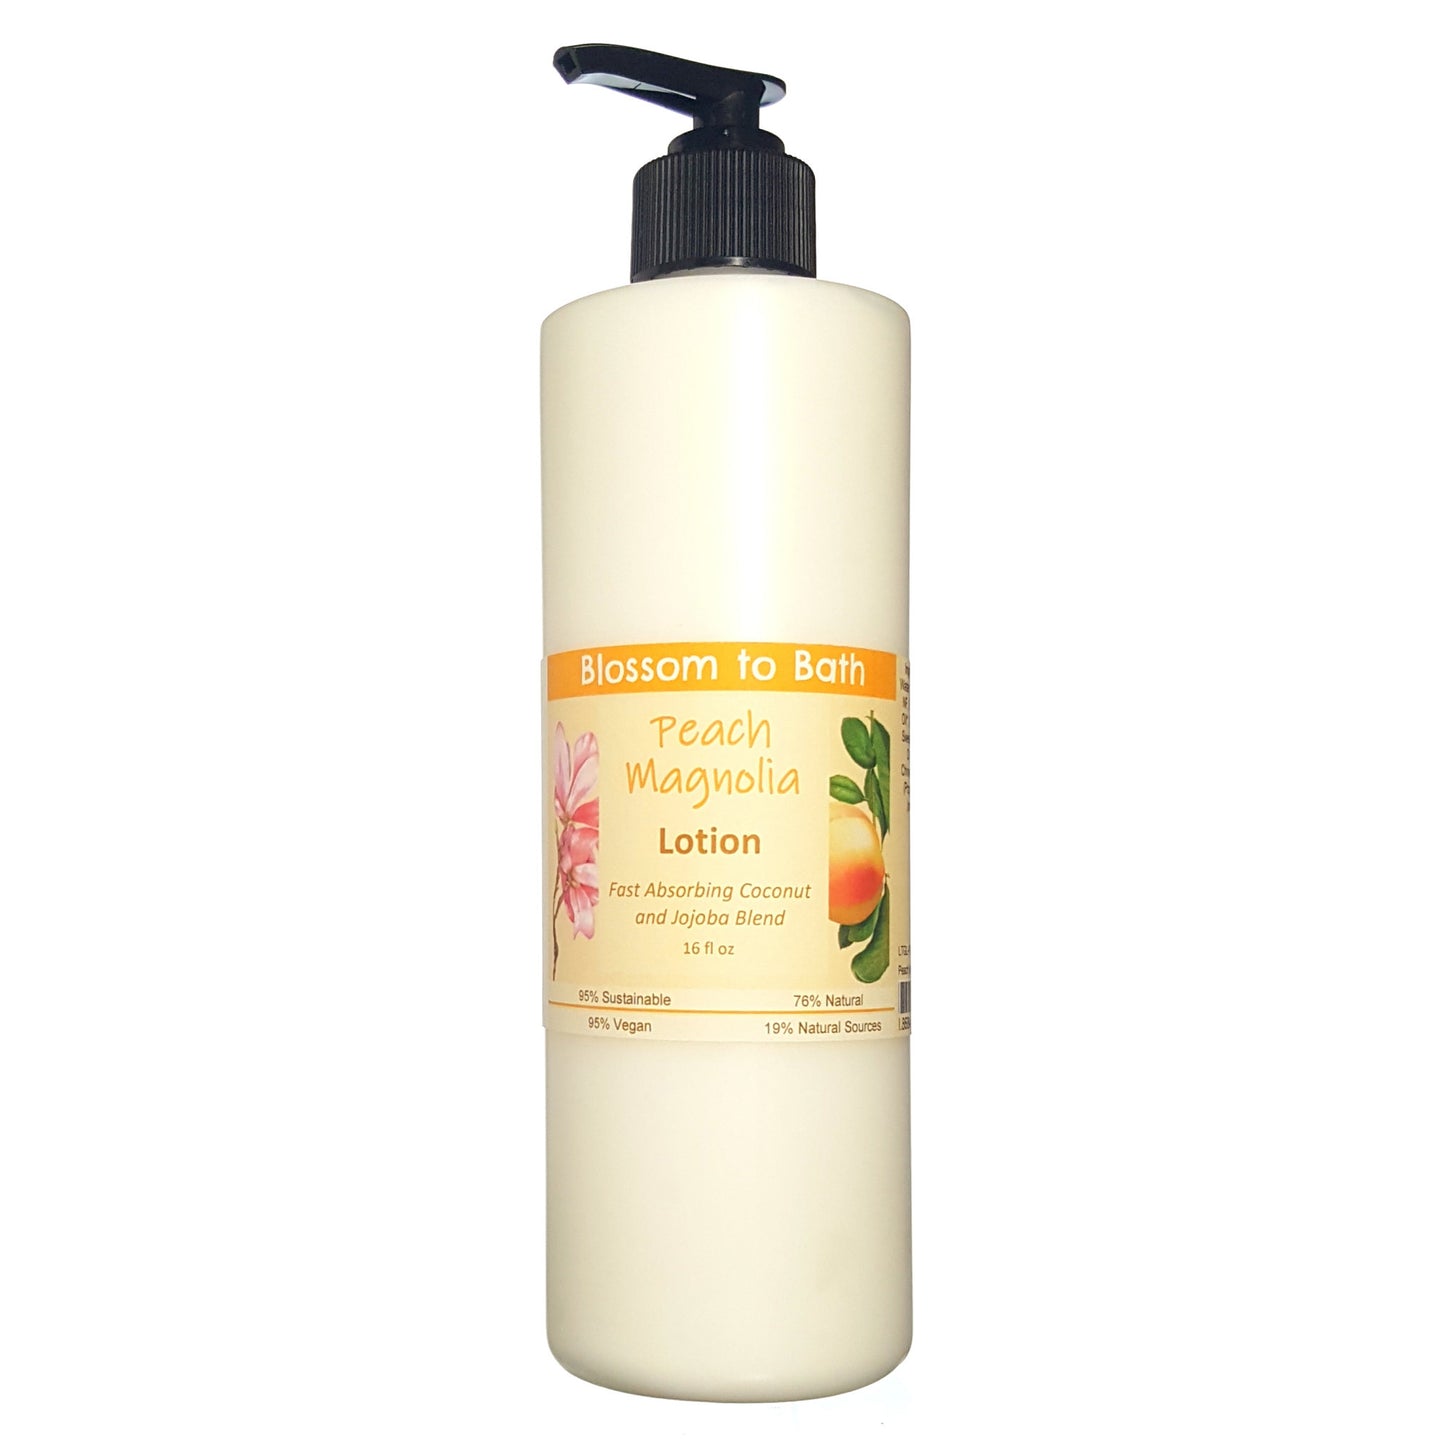 Buy Blossom to Bath Peach Magnolia Lotion from Flowersong Soap Studio.  Daily moisture luxury that soaks in quickly made with organic oils and butters that soften and smooth the skin  An intoxicating blend of peach, magnolia, and raspberry.